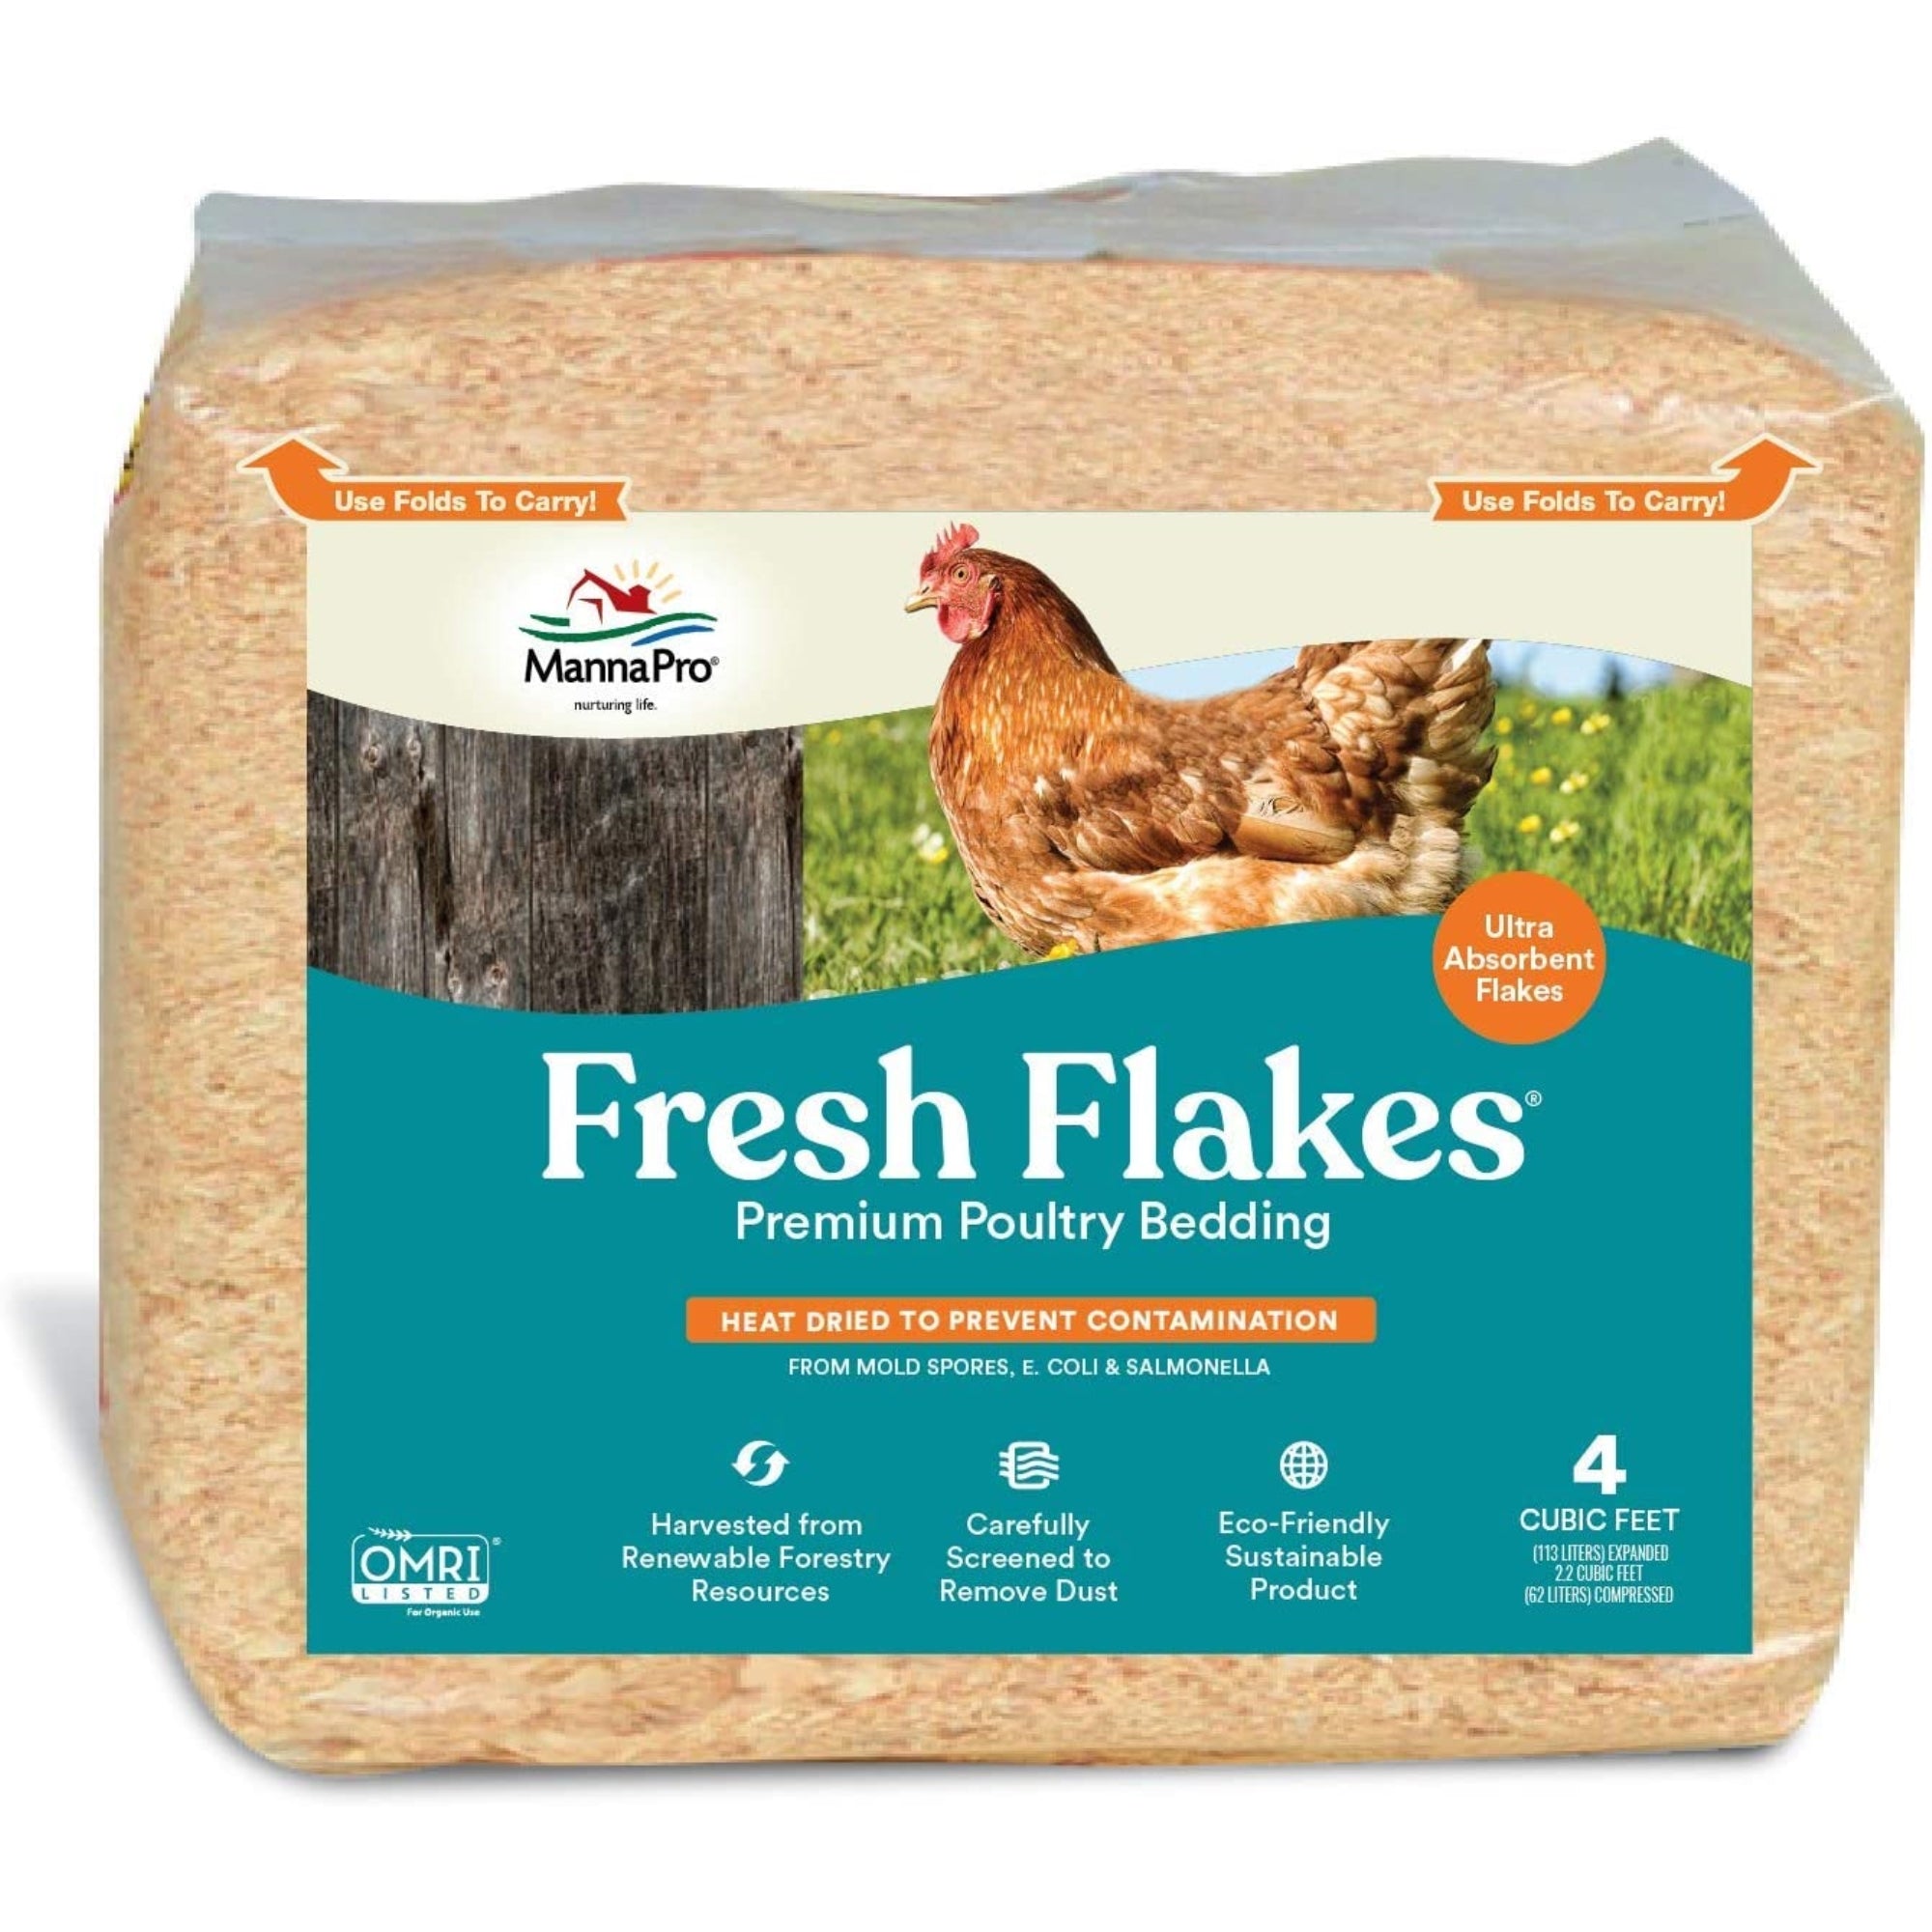 Fresh Flakes Poultry Bedding, 12 lbs